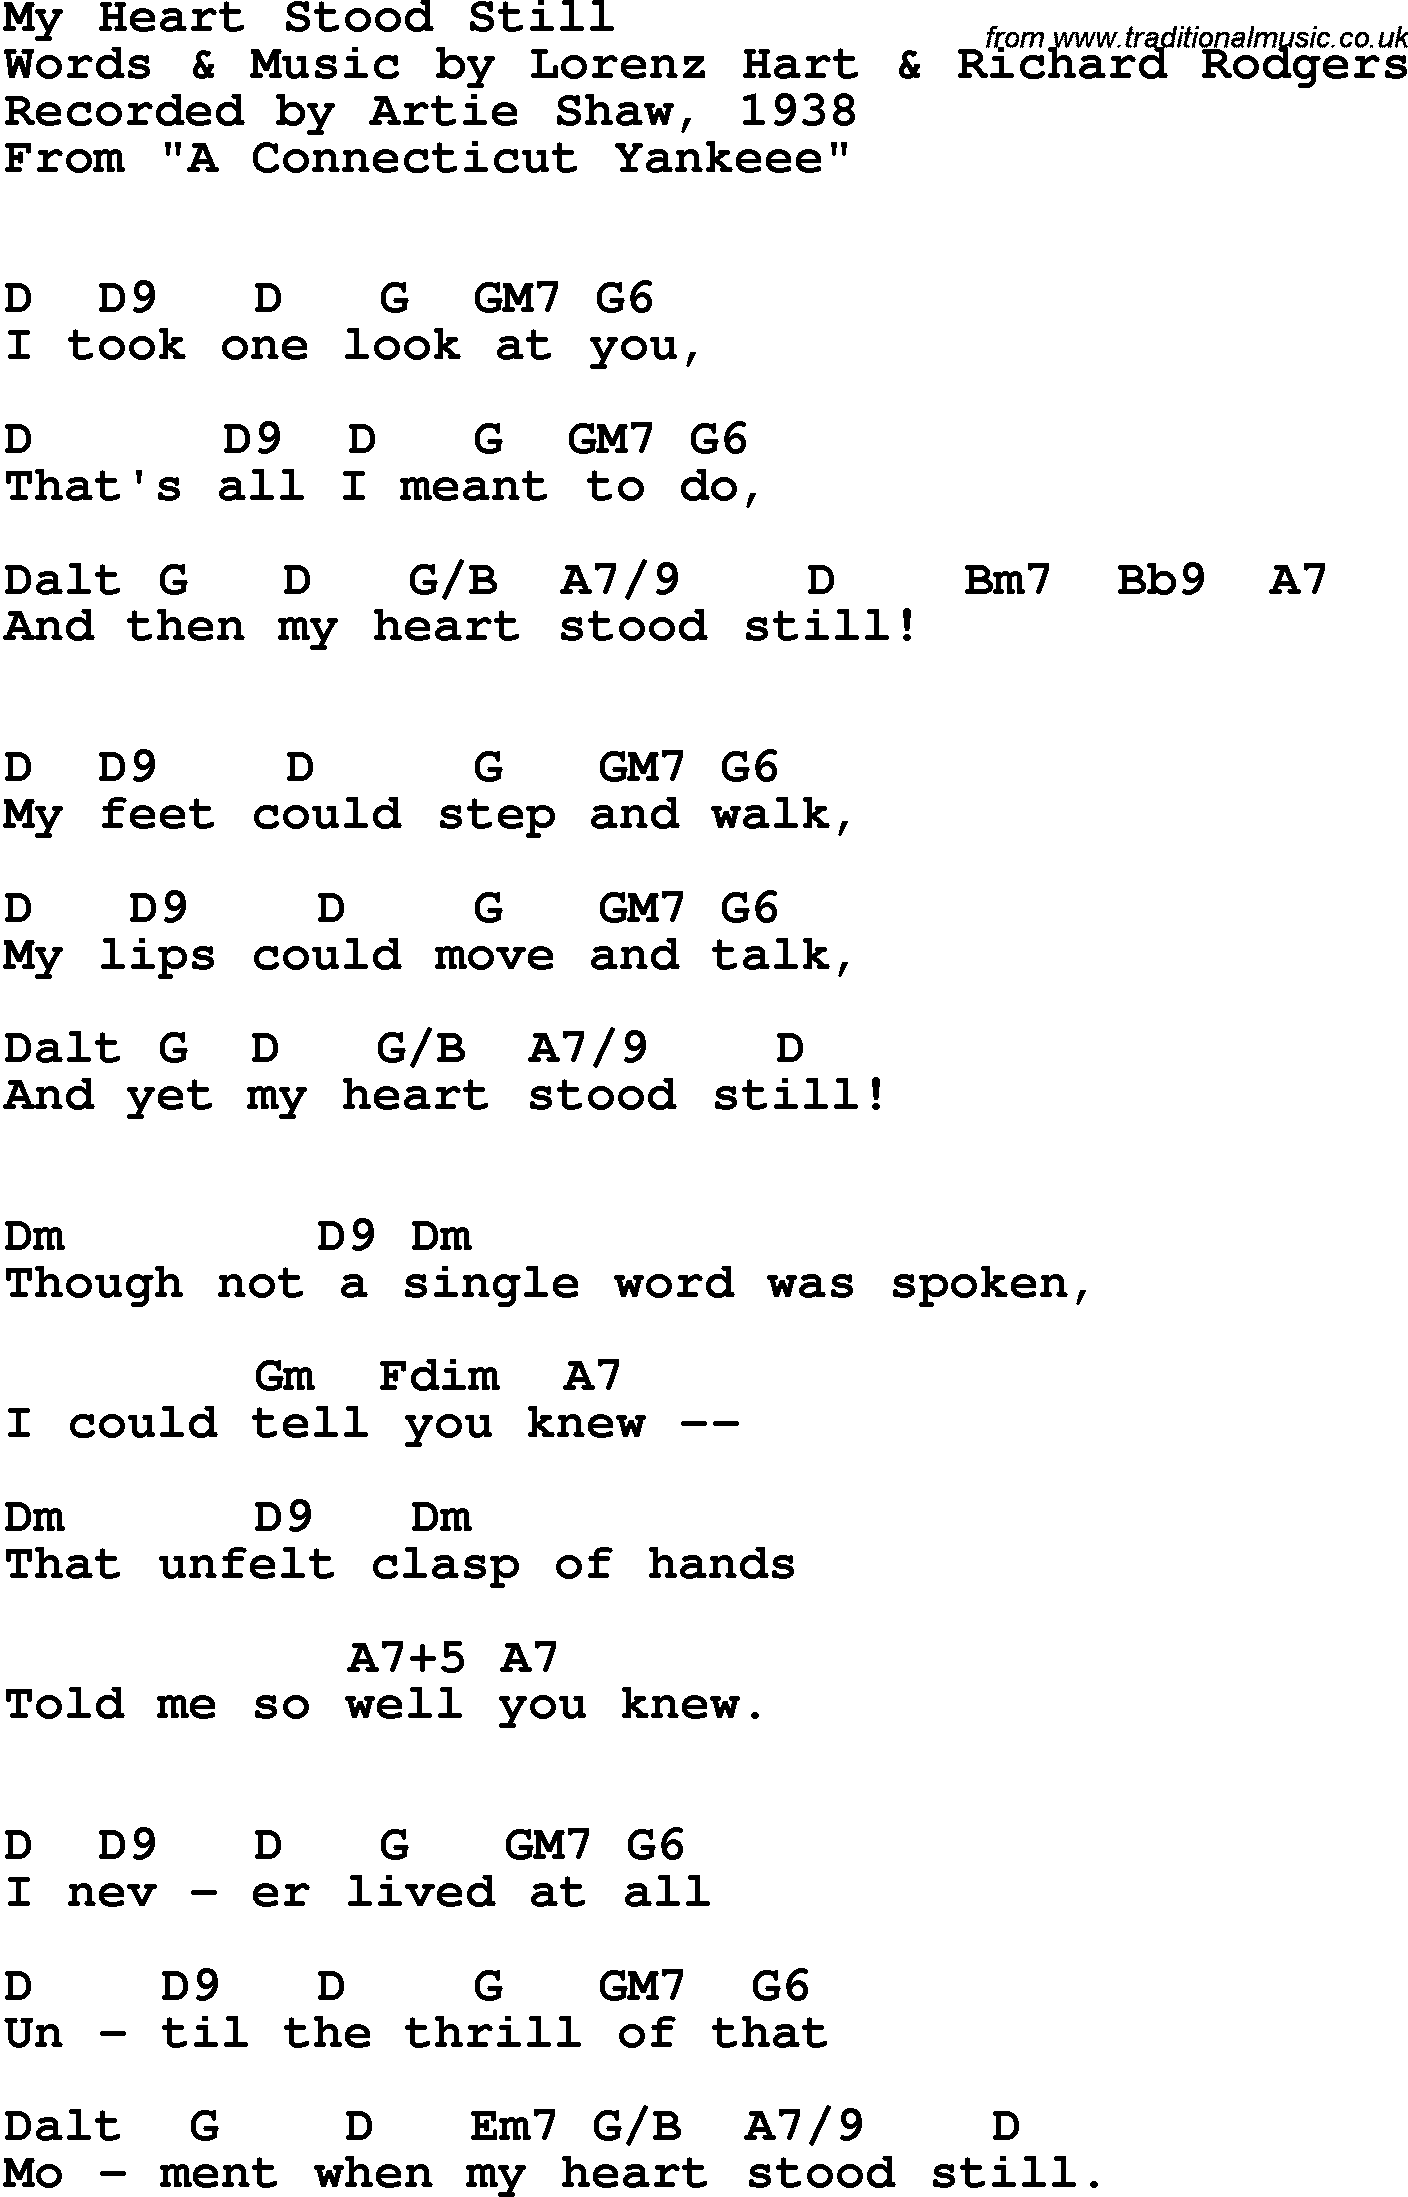 Song Lyrics with guitar chords for My Heart Stood Still - Artie Shaw, 1938